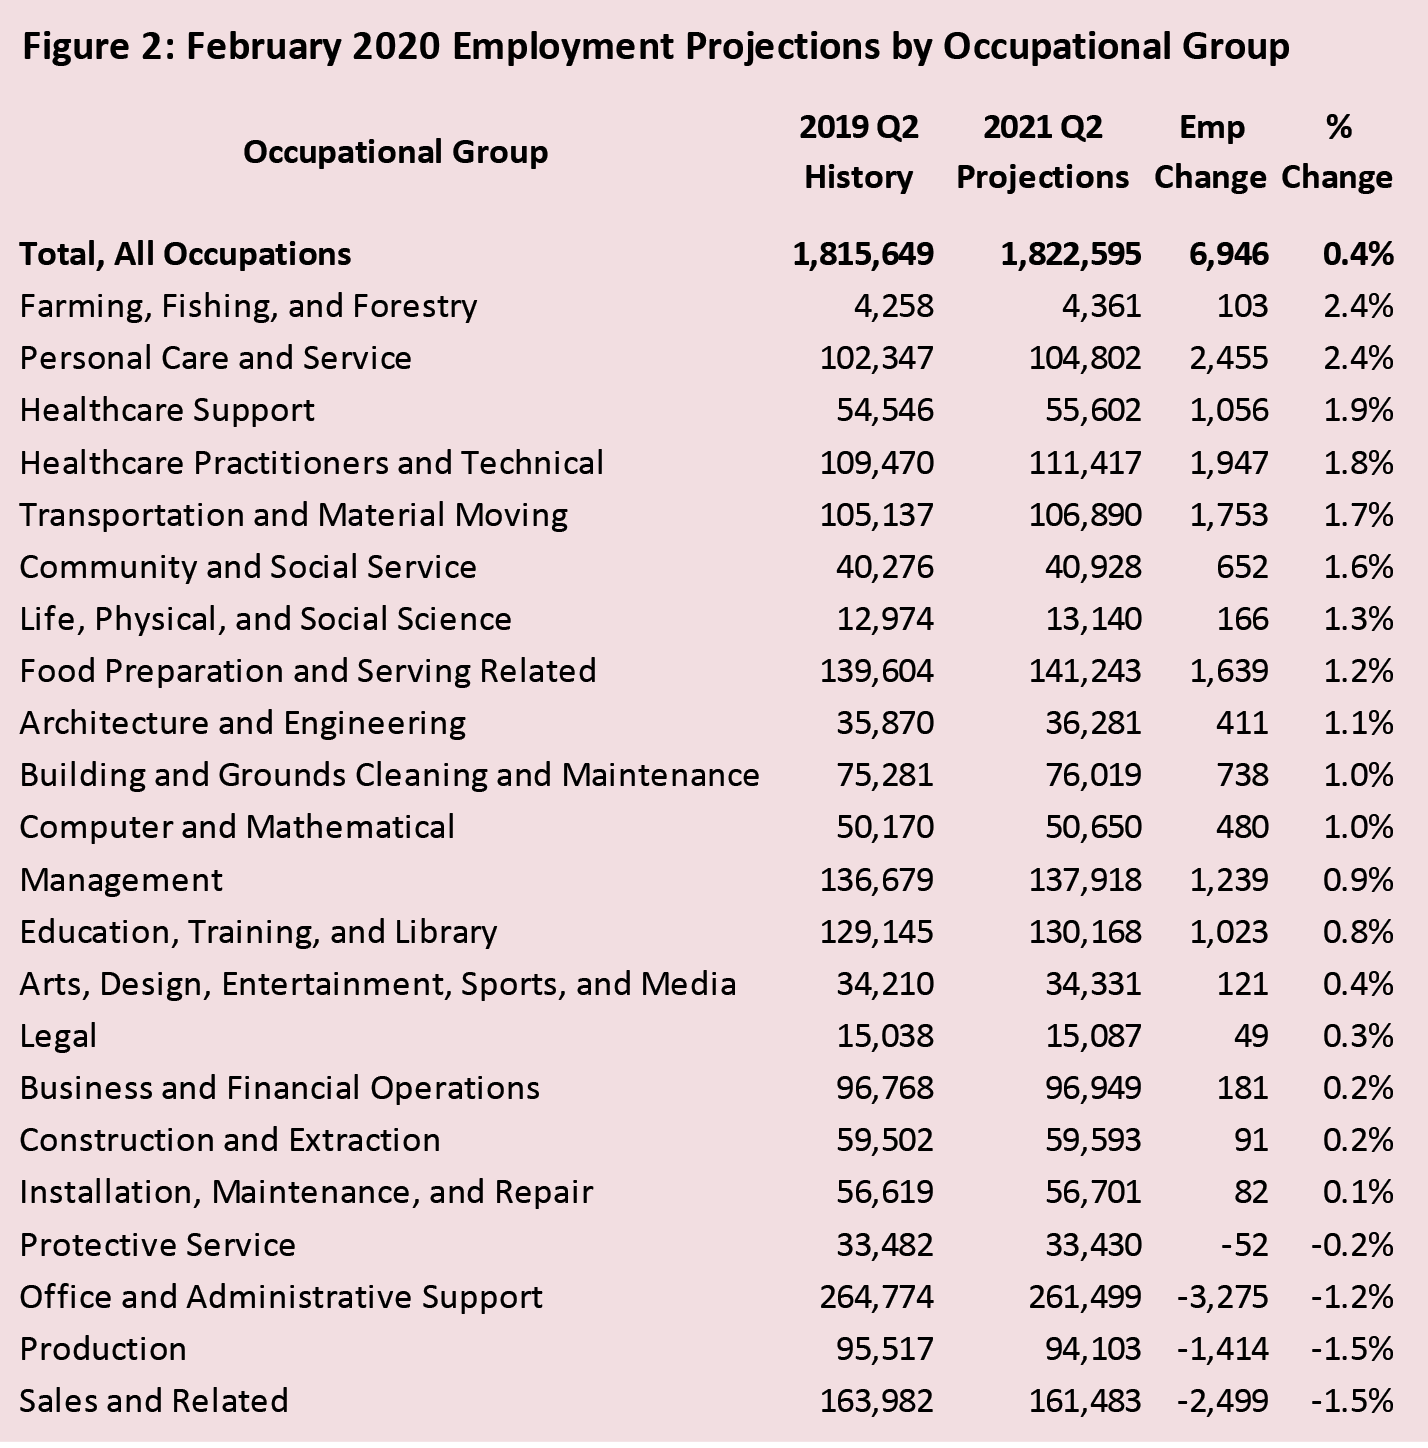 Figure 2: February 2020 Employment Projections by Occupational Group